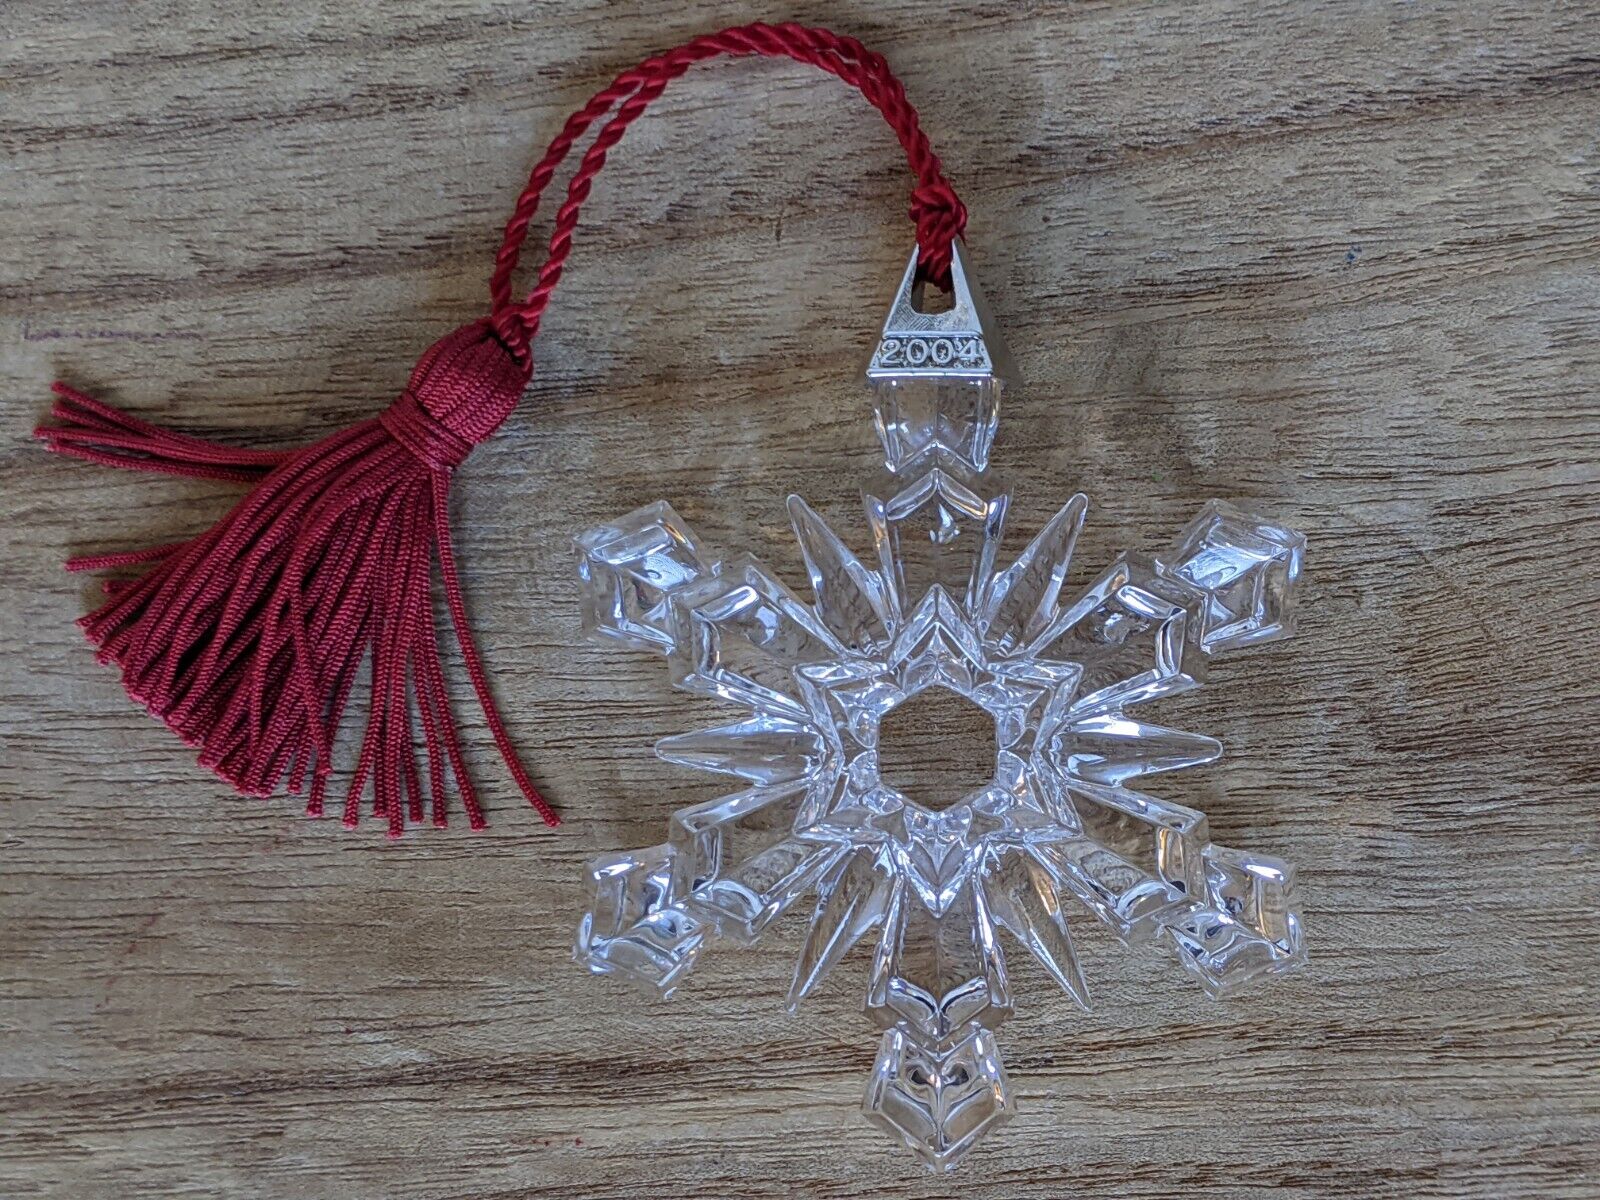  Waterford  Marquis Crystal 2004 annual snowflake ornament ~LOVELY